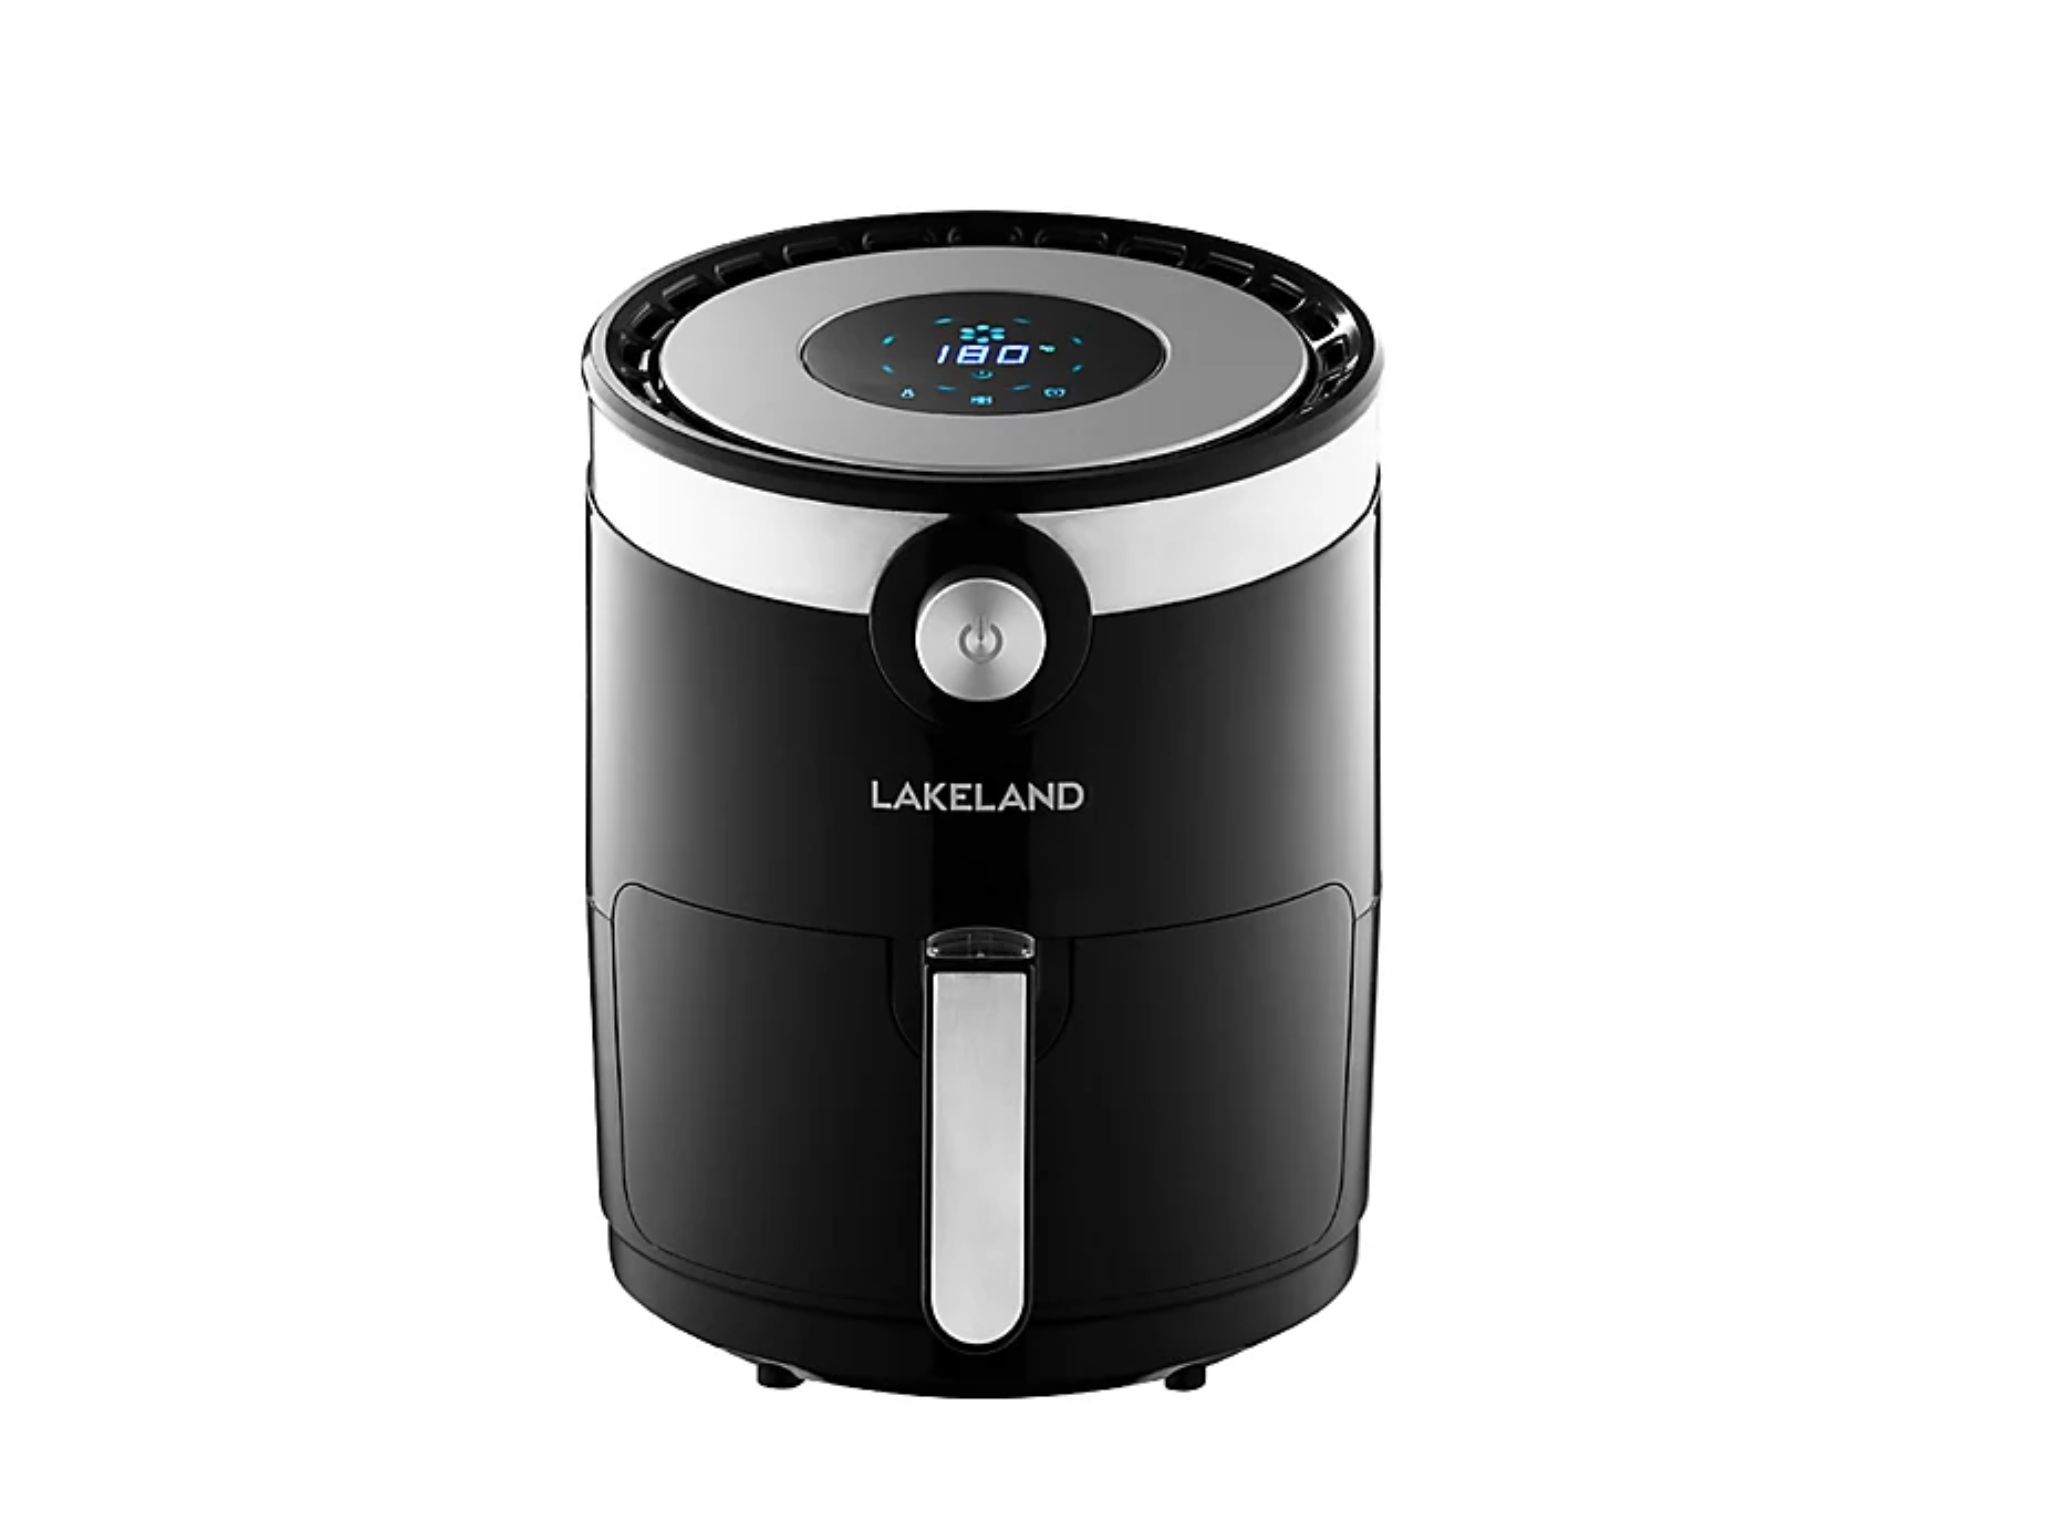 lakeland-best-air-fryer-review-indybest.png